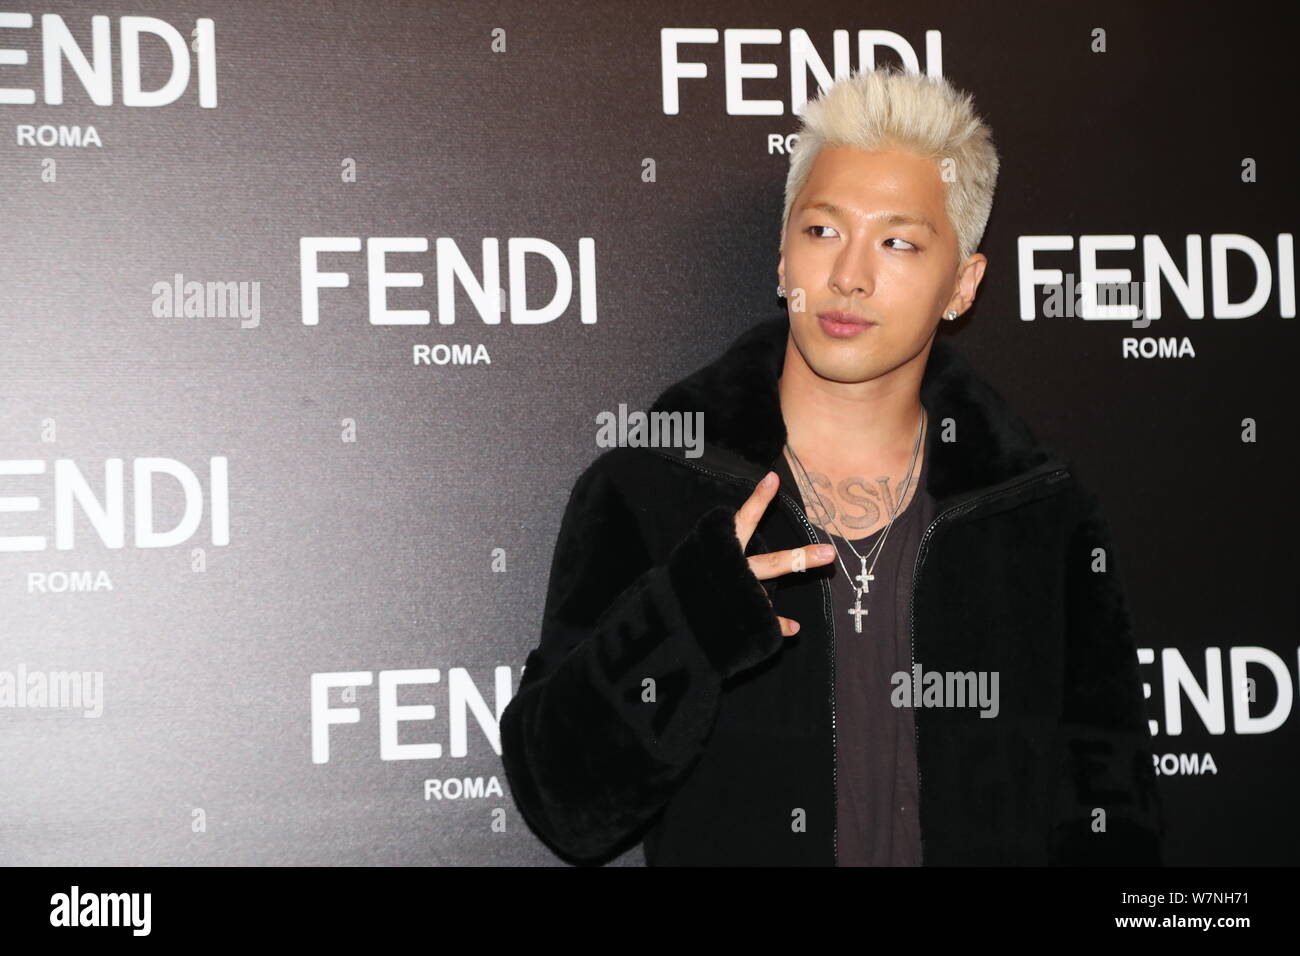 Dong Young-bae, better known by his stage name Taeyang or Sol, of South Korean boy band BigBang or Big attends promotional for Fendi in Stock Photo - Alamy